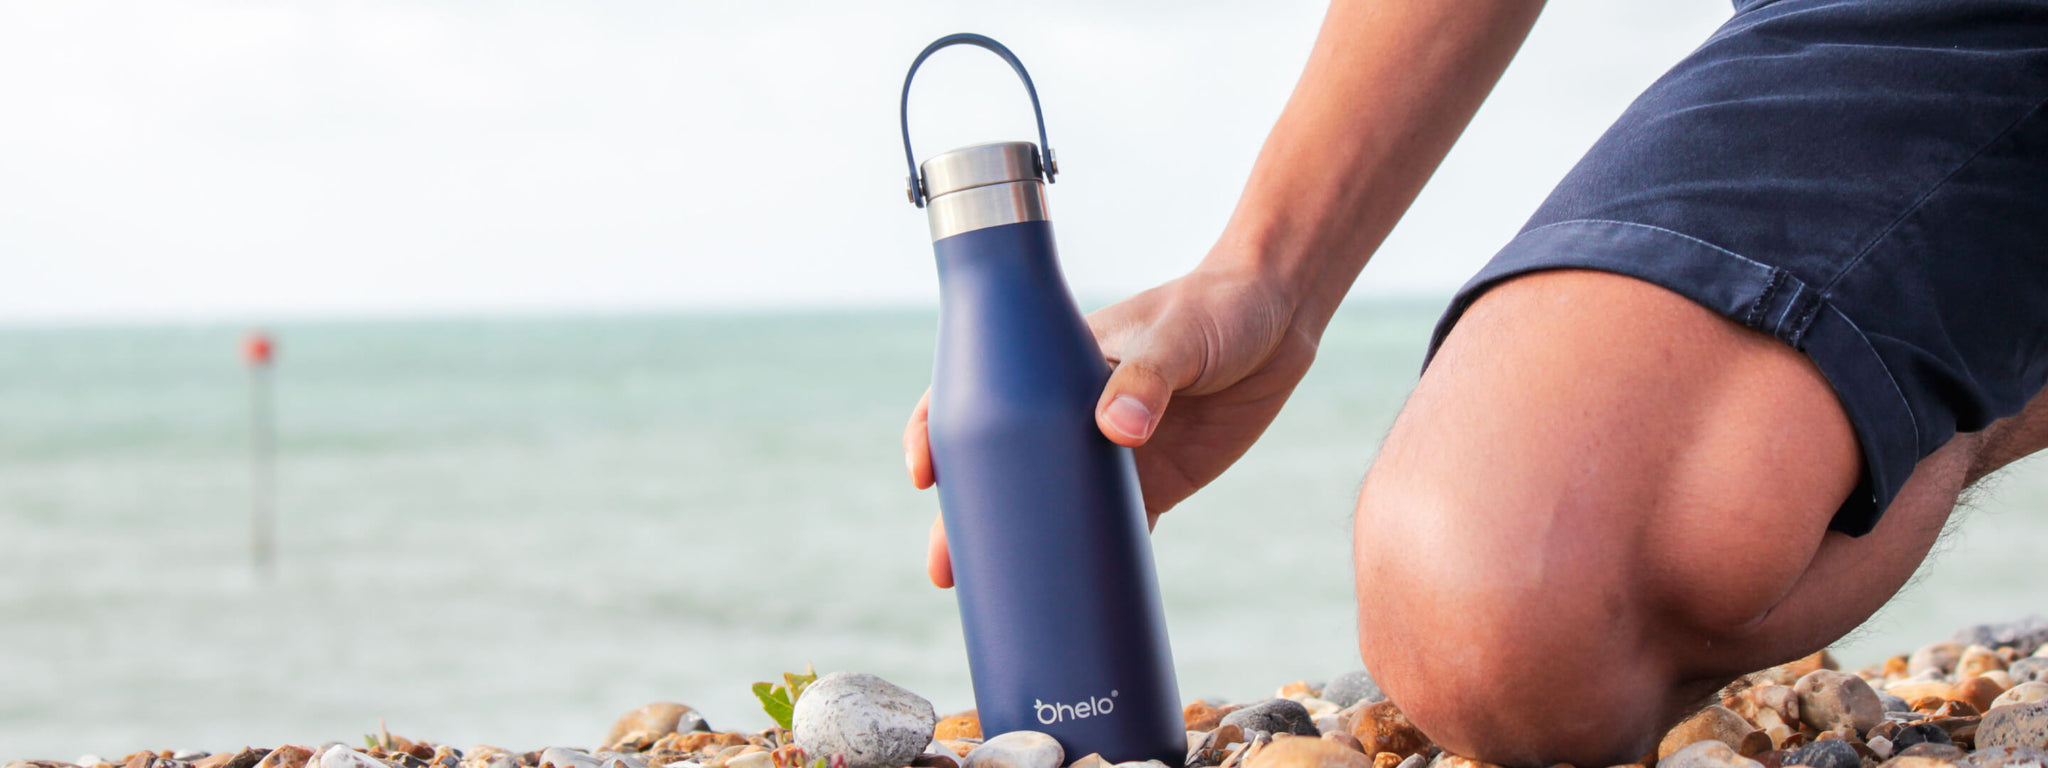 What is the best way to clean your stainless steel water bottle?